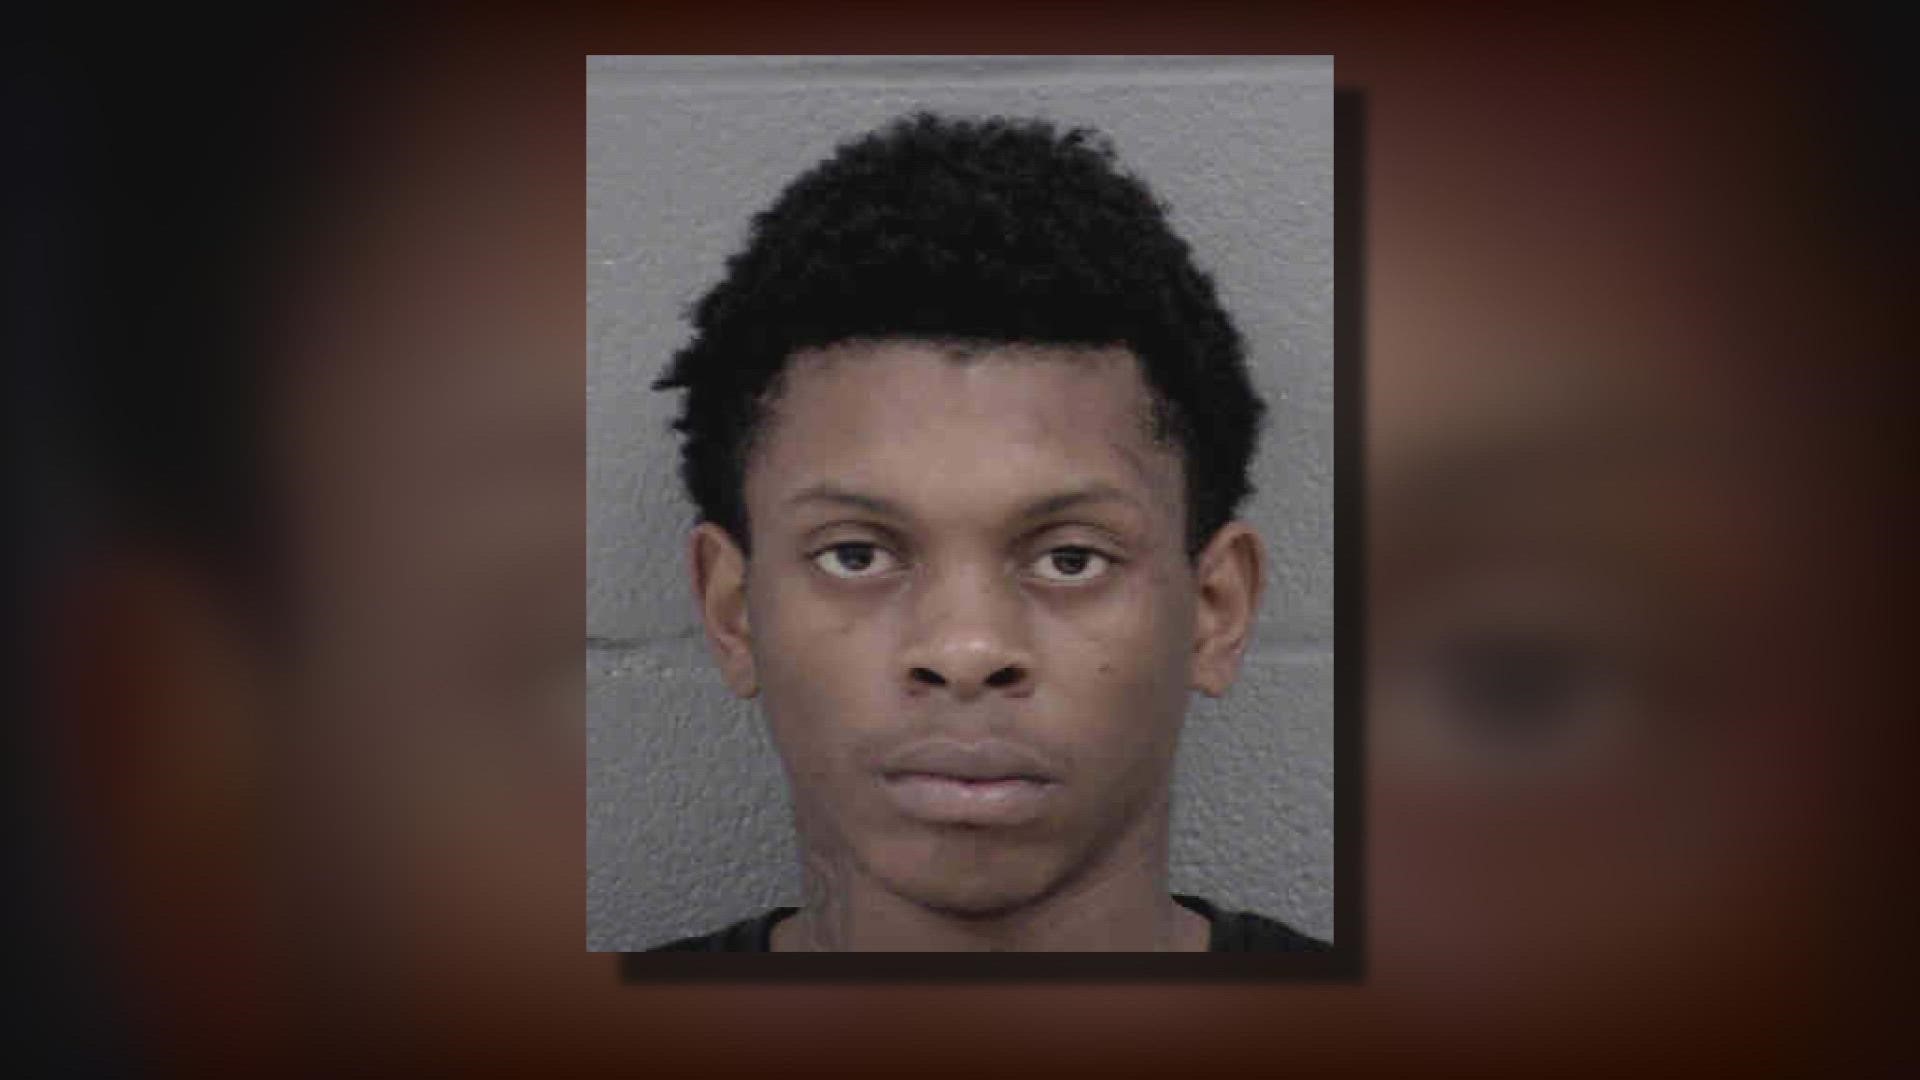 Azaevon Singleton accepted a plea deal in connection with the murder of Ricardo Perez in 2020. He was sentenced to at least 16 years in prison.